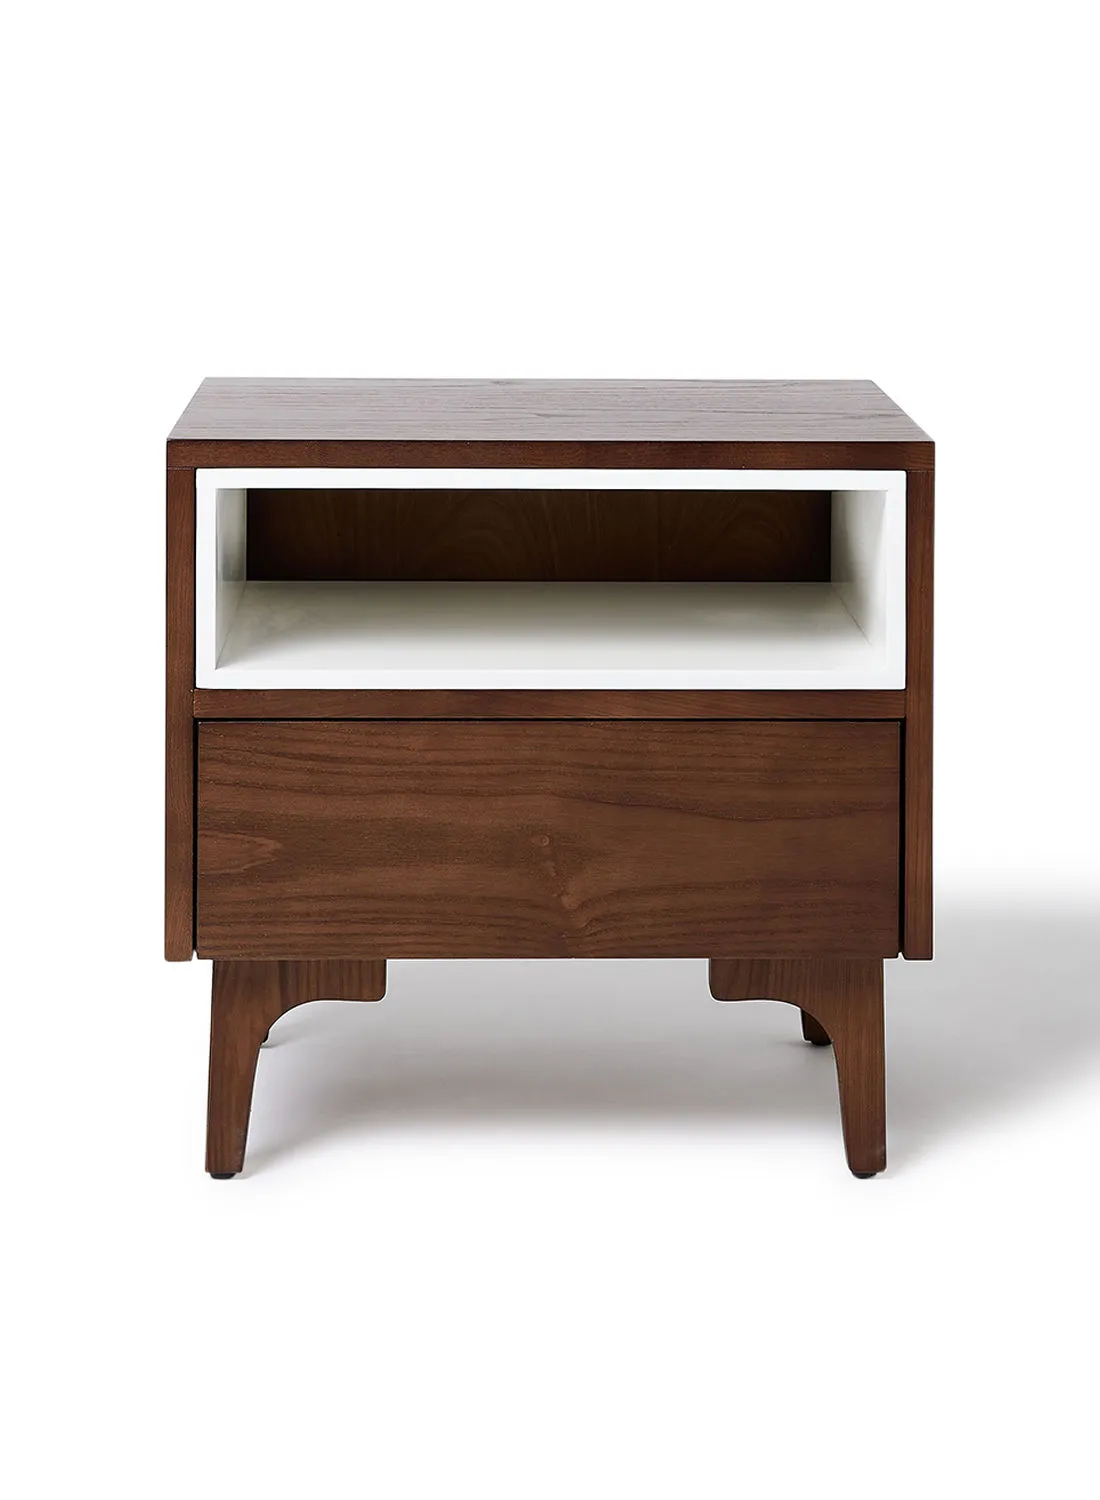 Switch Bedside Table - Size 50 X 38 X 48.5 Walnut Nightstand Comdina - Bedroom Furniture